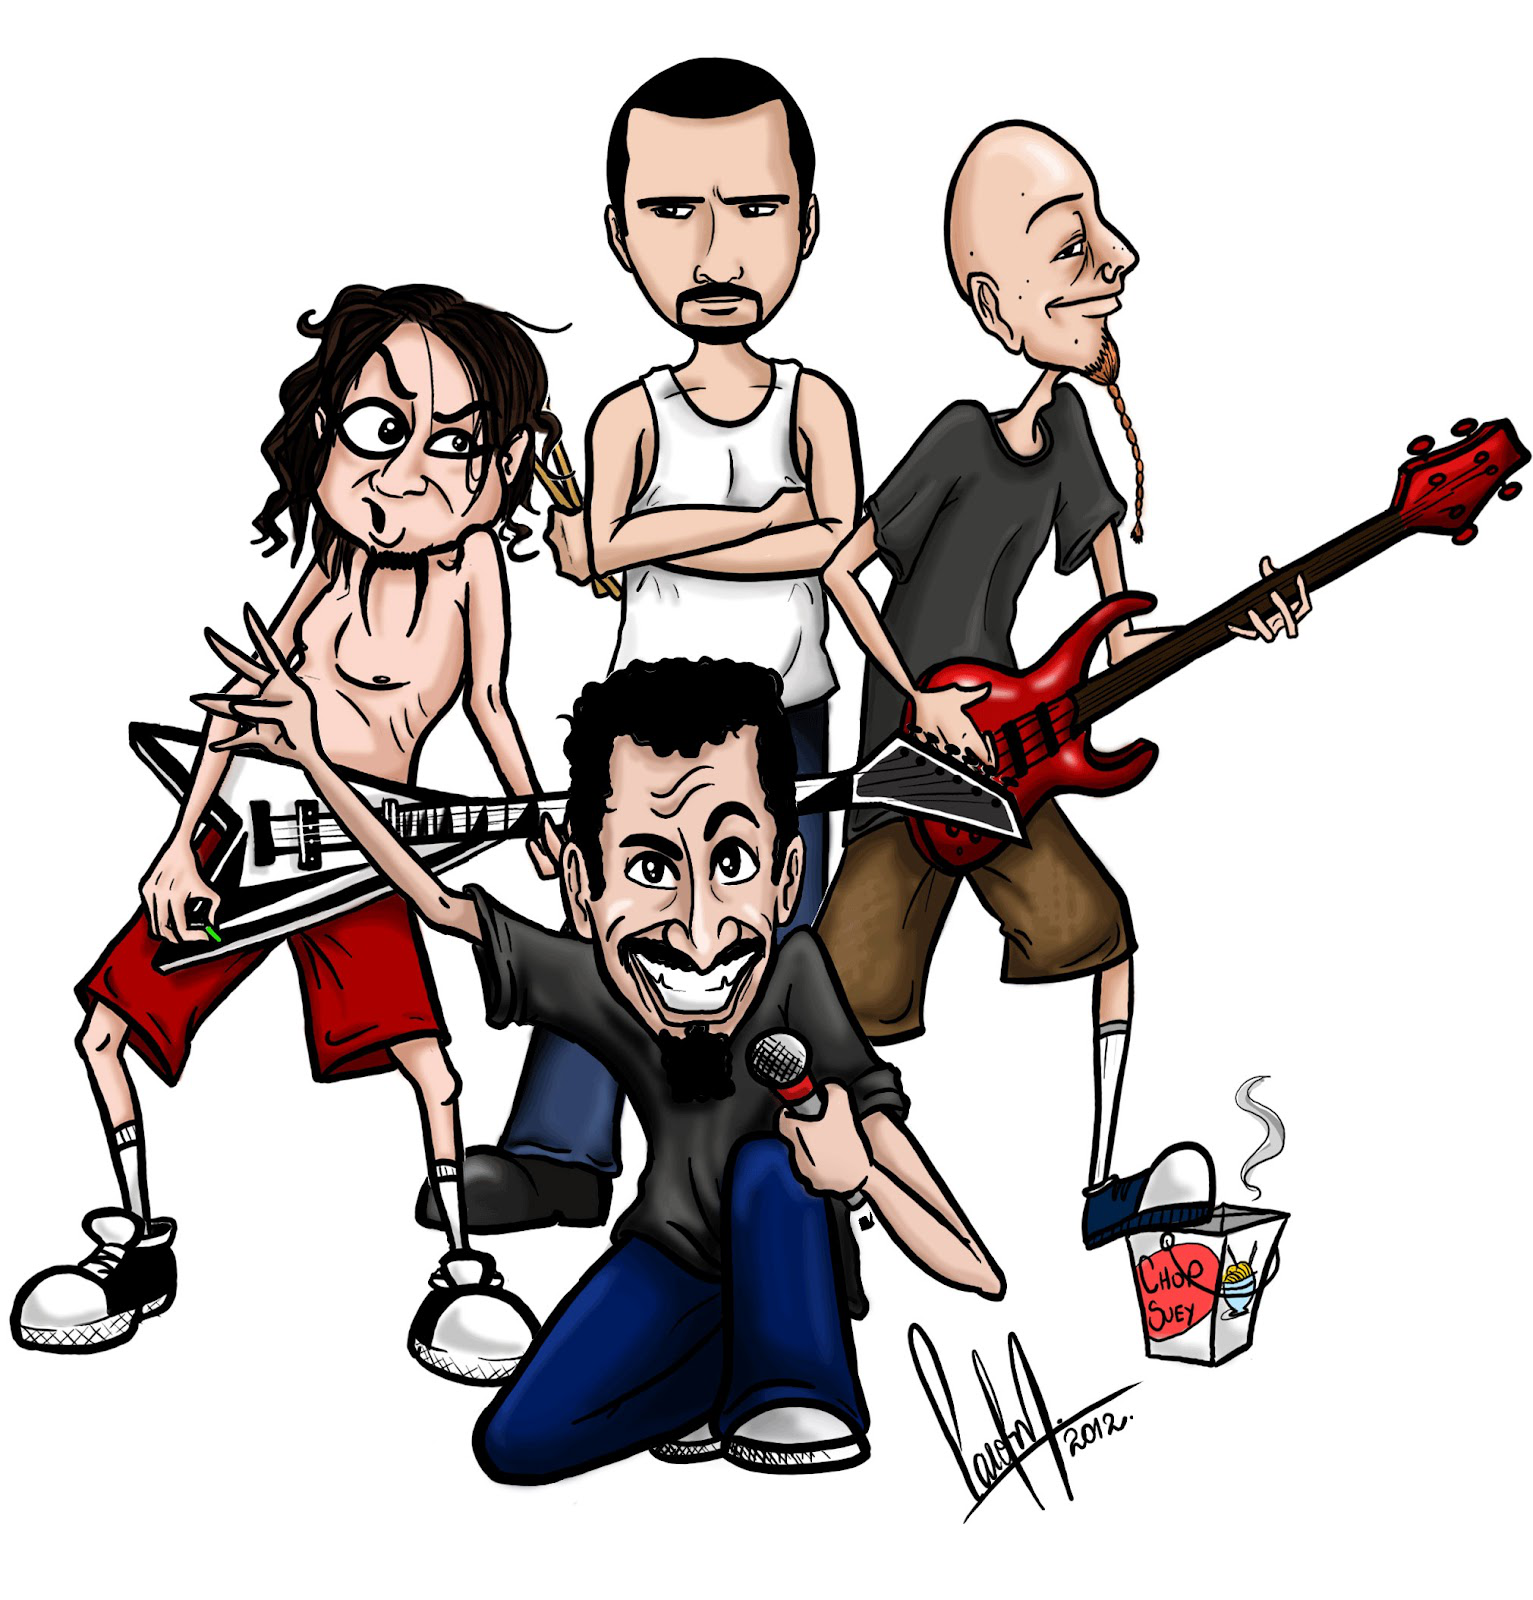 SOAD музыканты. System of a down. System of a down арты. SOAD рисунки.